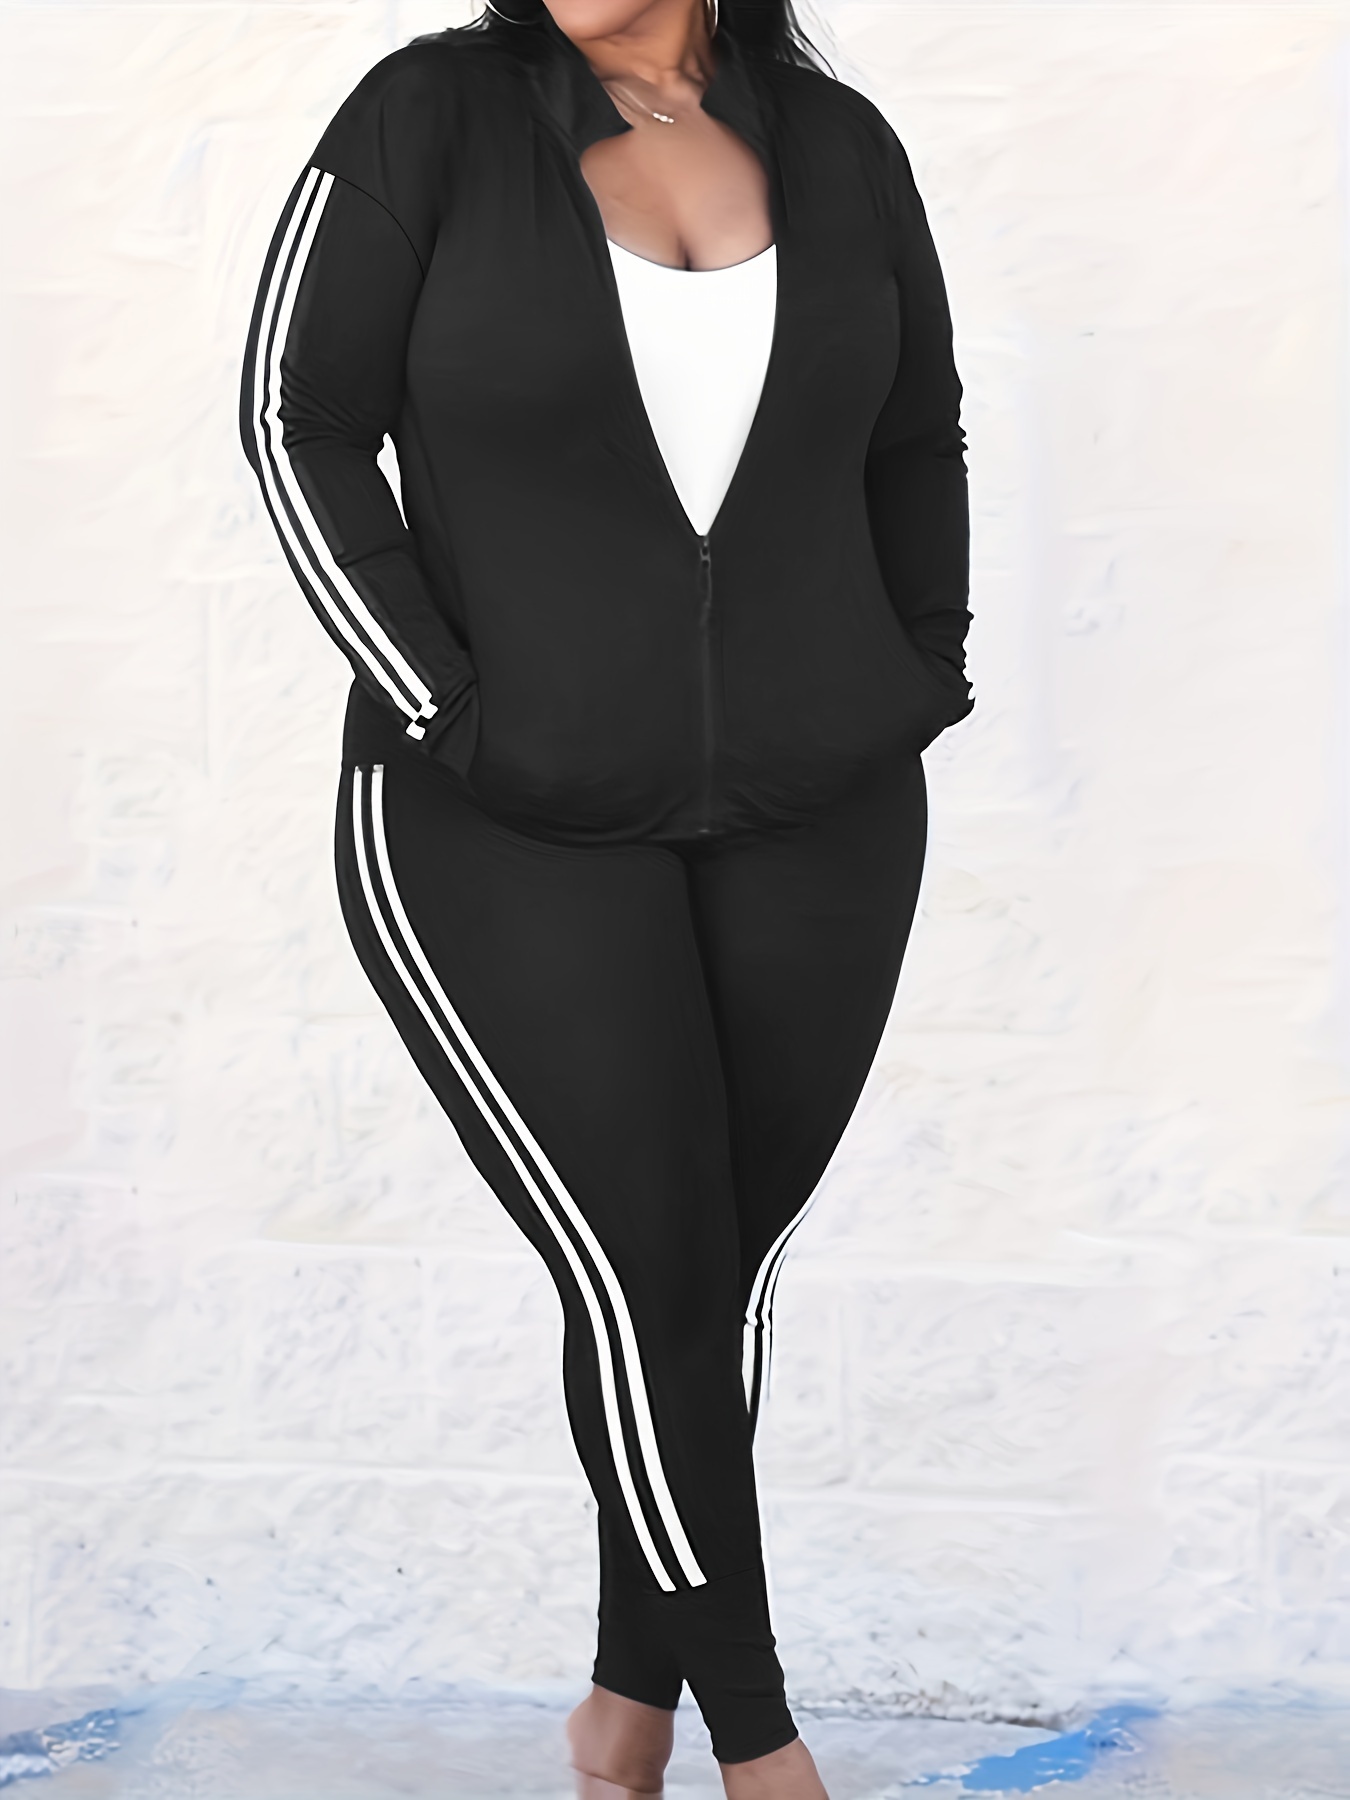 Summer Plus Size Workout Sets Black Jogger Suit With Short Sleeve T Shirt  And Shorts Casual Sports Outfit In White And Red Style 3504 From  Sell_clothing, $16.39